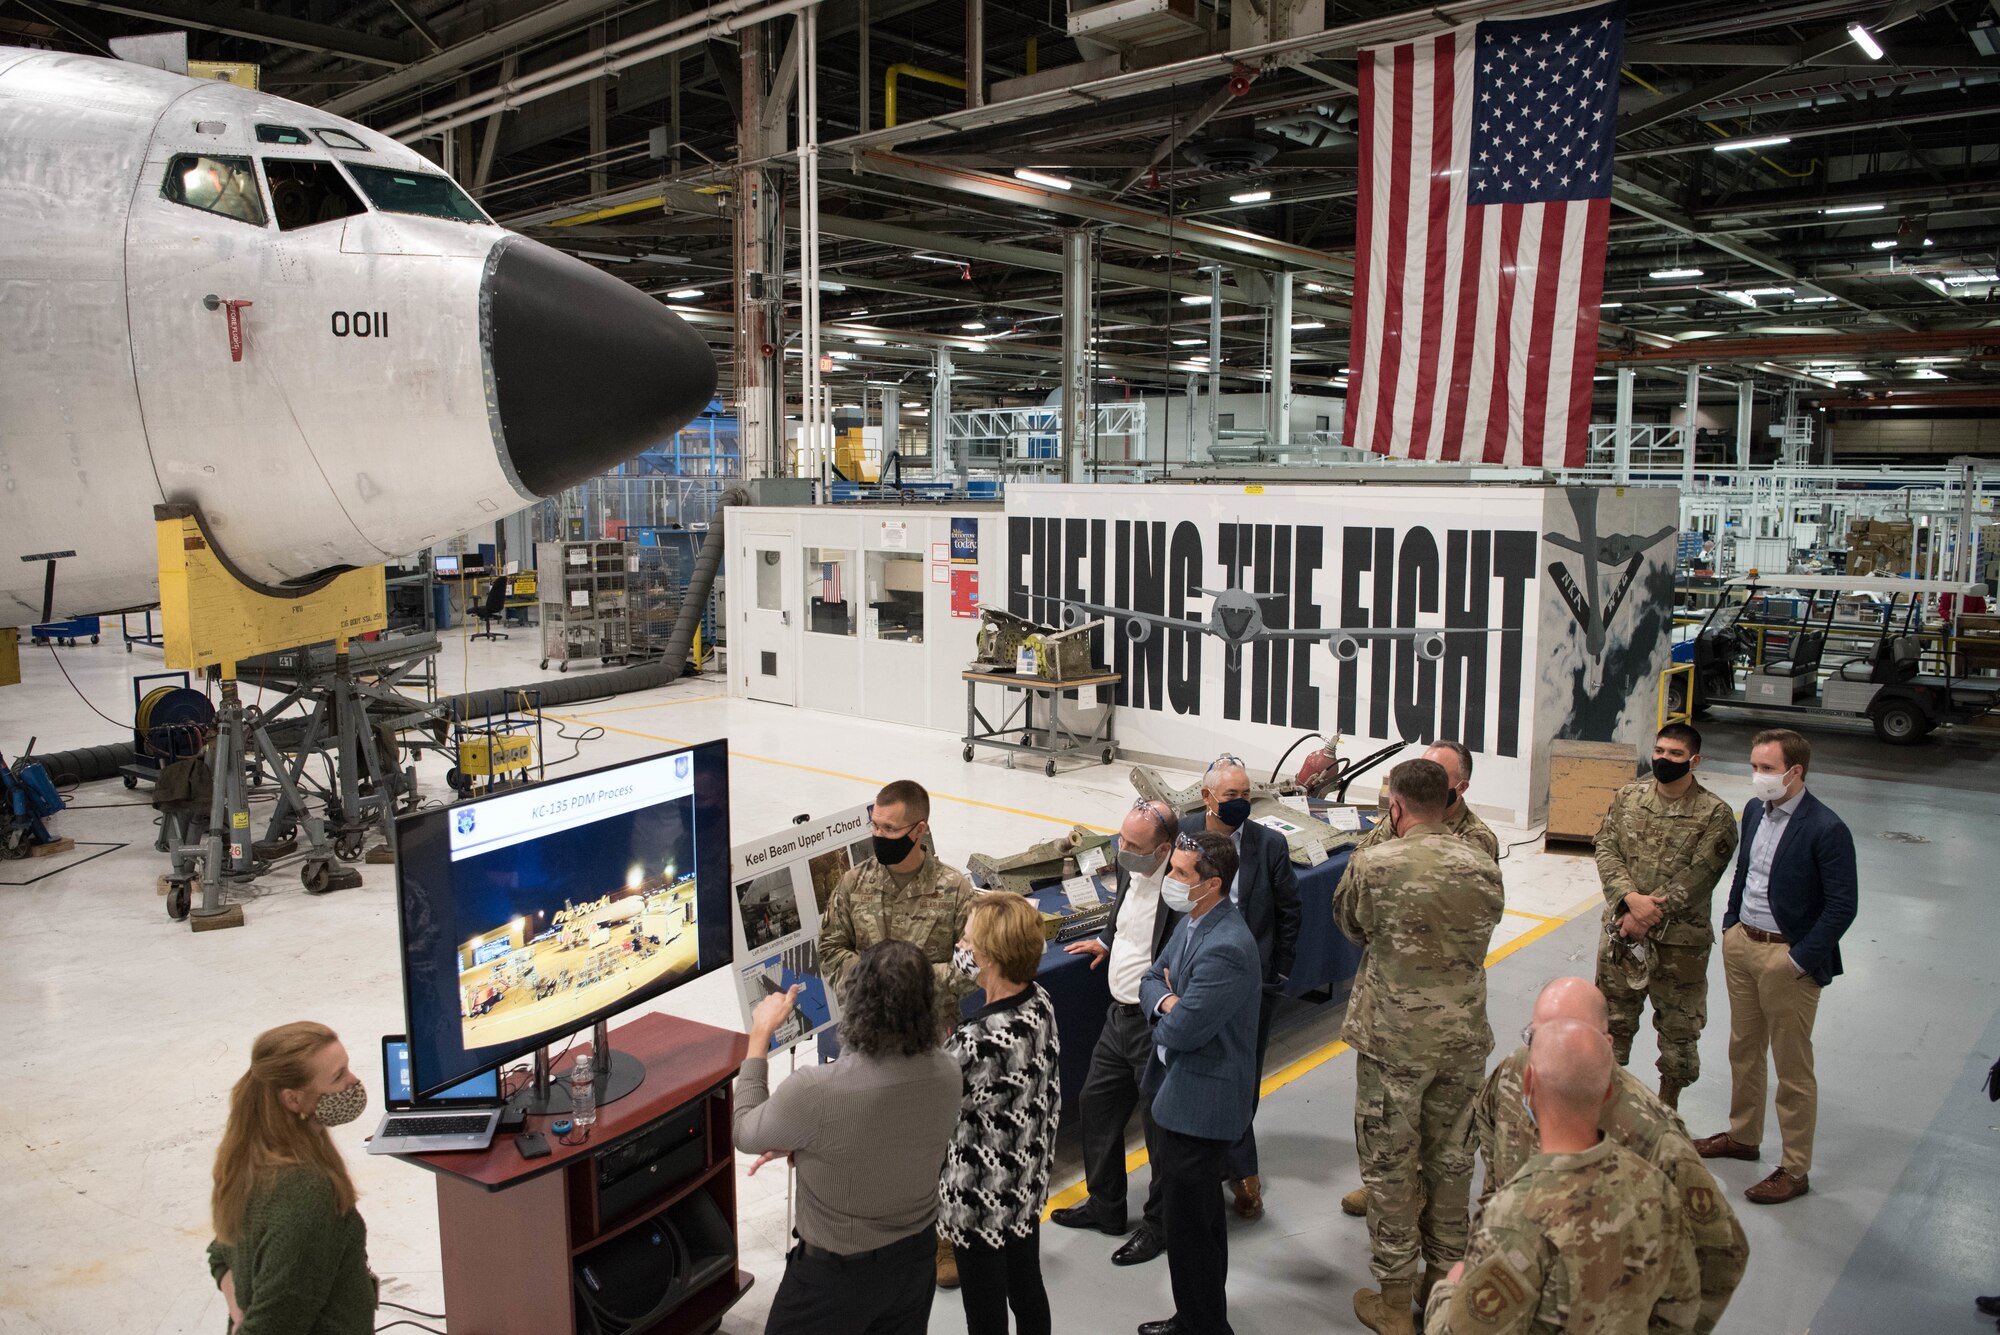 Group of Airmen and Civilians looking at TV with aircraft undergoing maintenance in background.